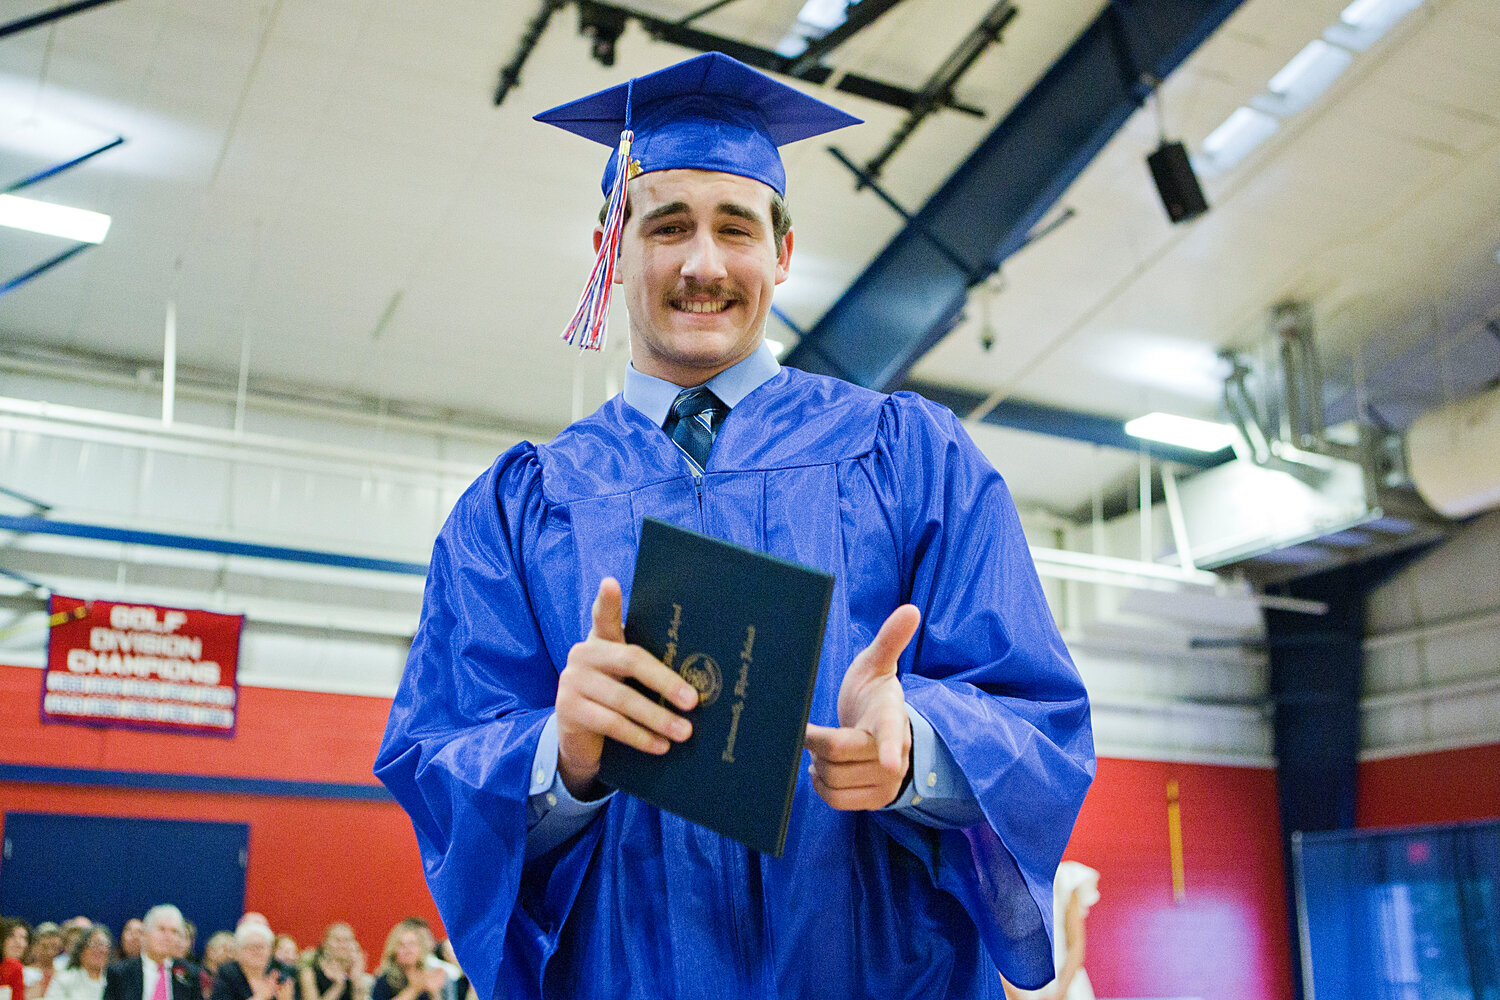 Colin Bahr mugs for the camera after collecting his diploma.